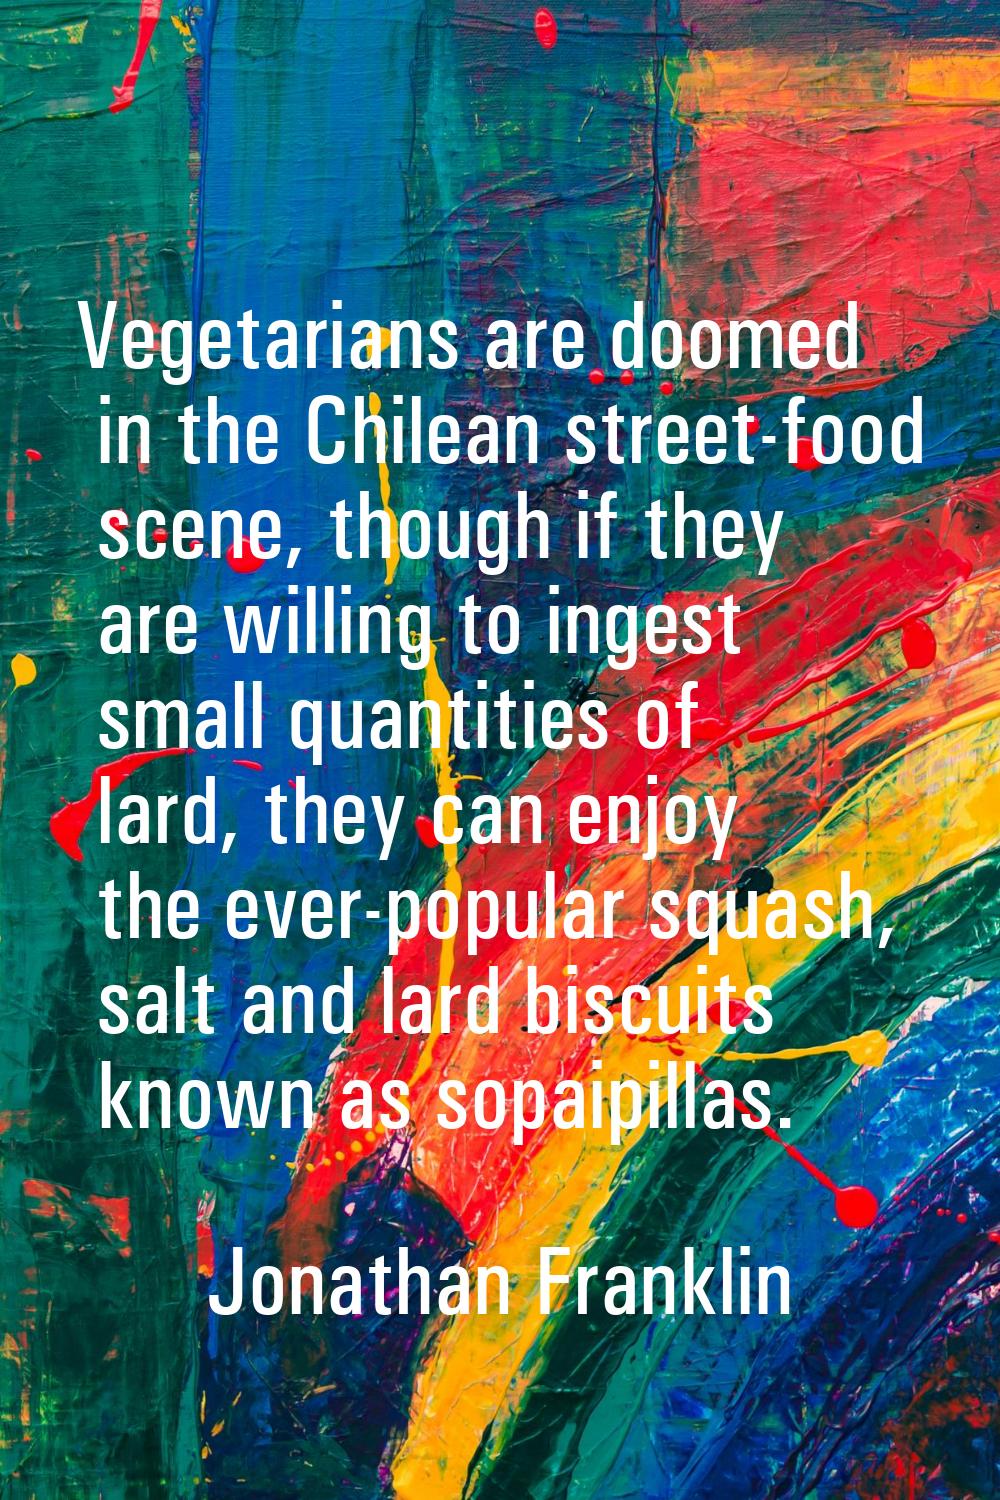 Vegetarians are doomed in the Chilean street-food scene, though if they are willing to ingest small